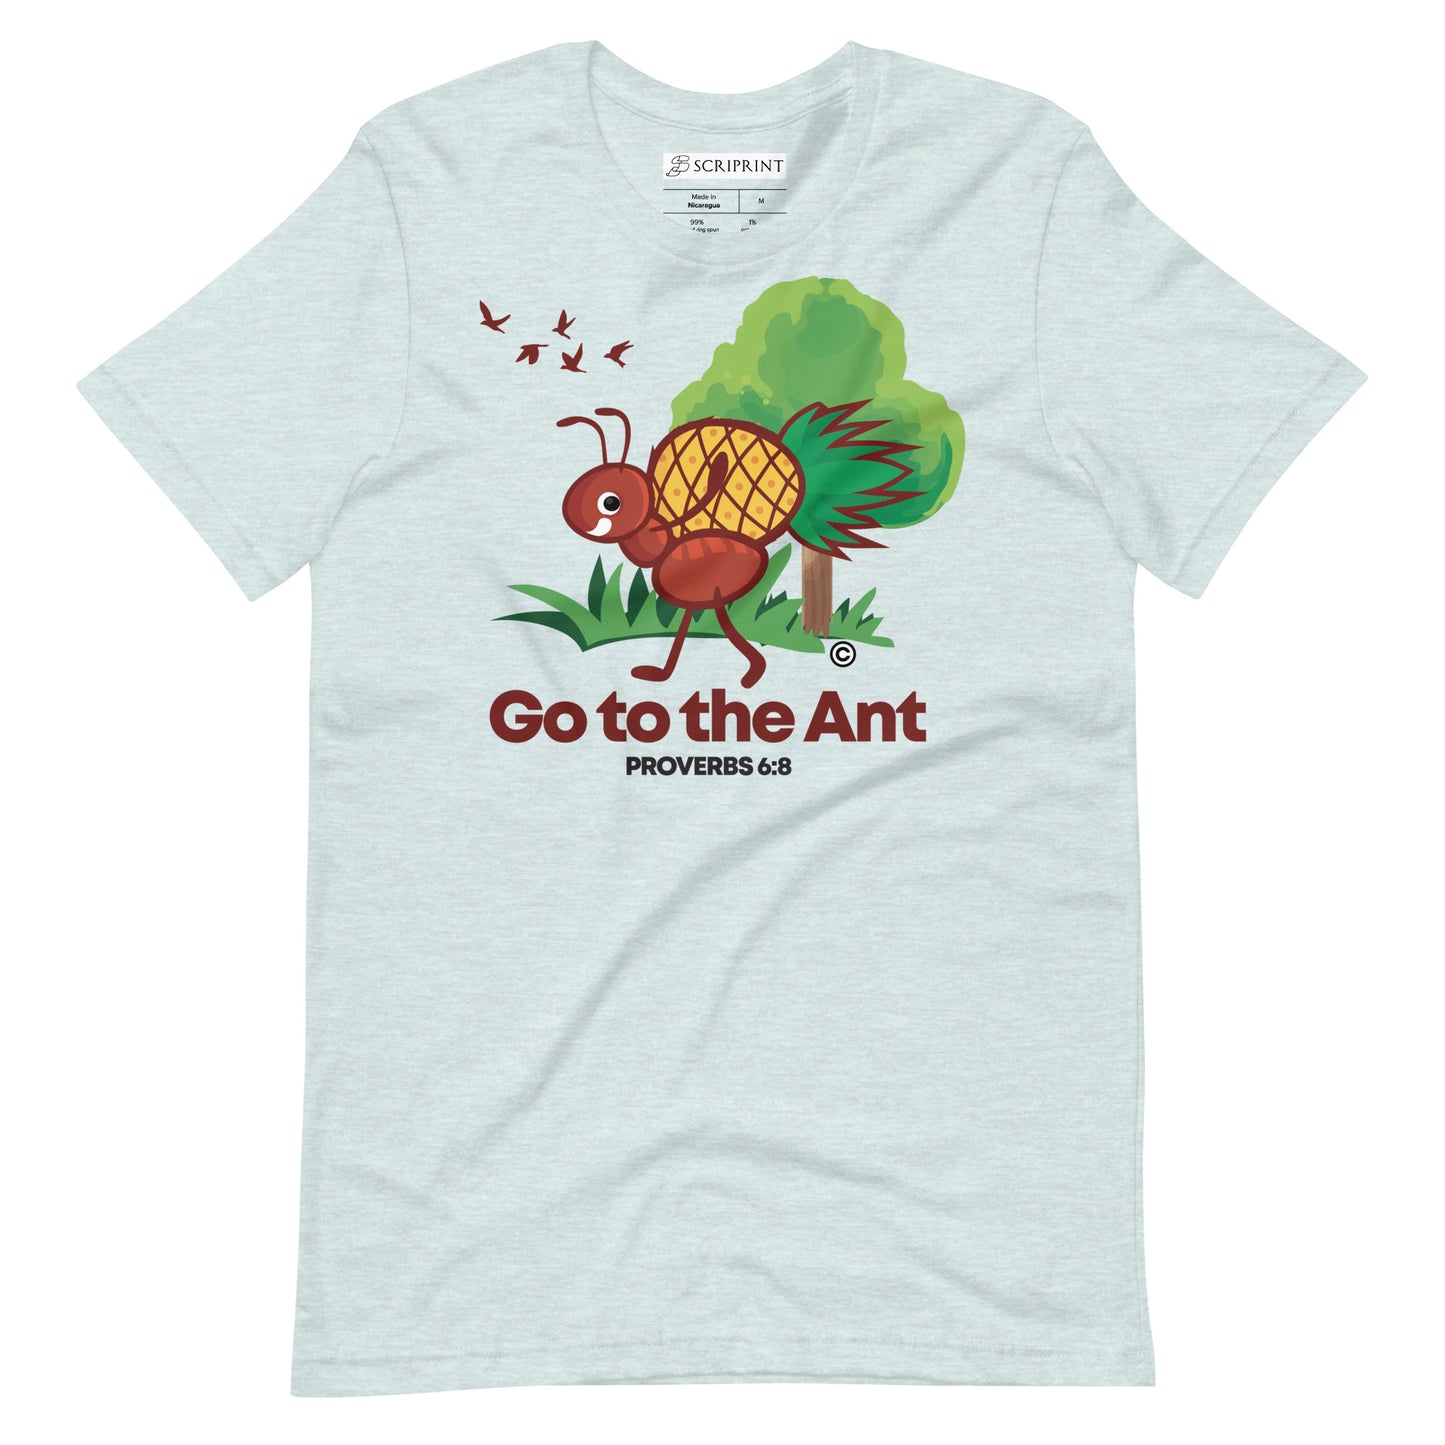 Go to the Ant Men's T-Shirt